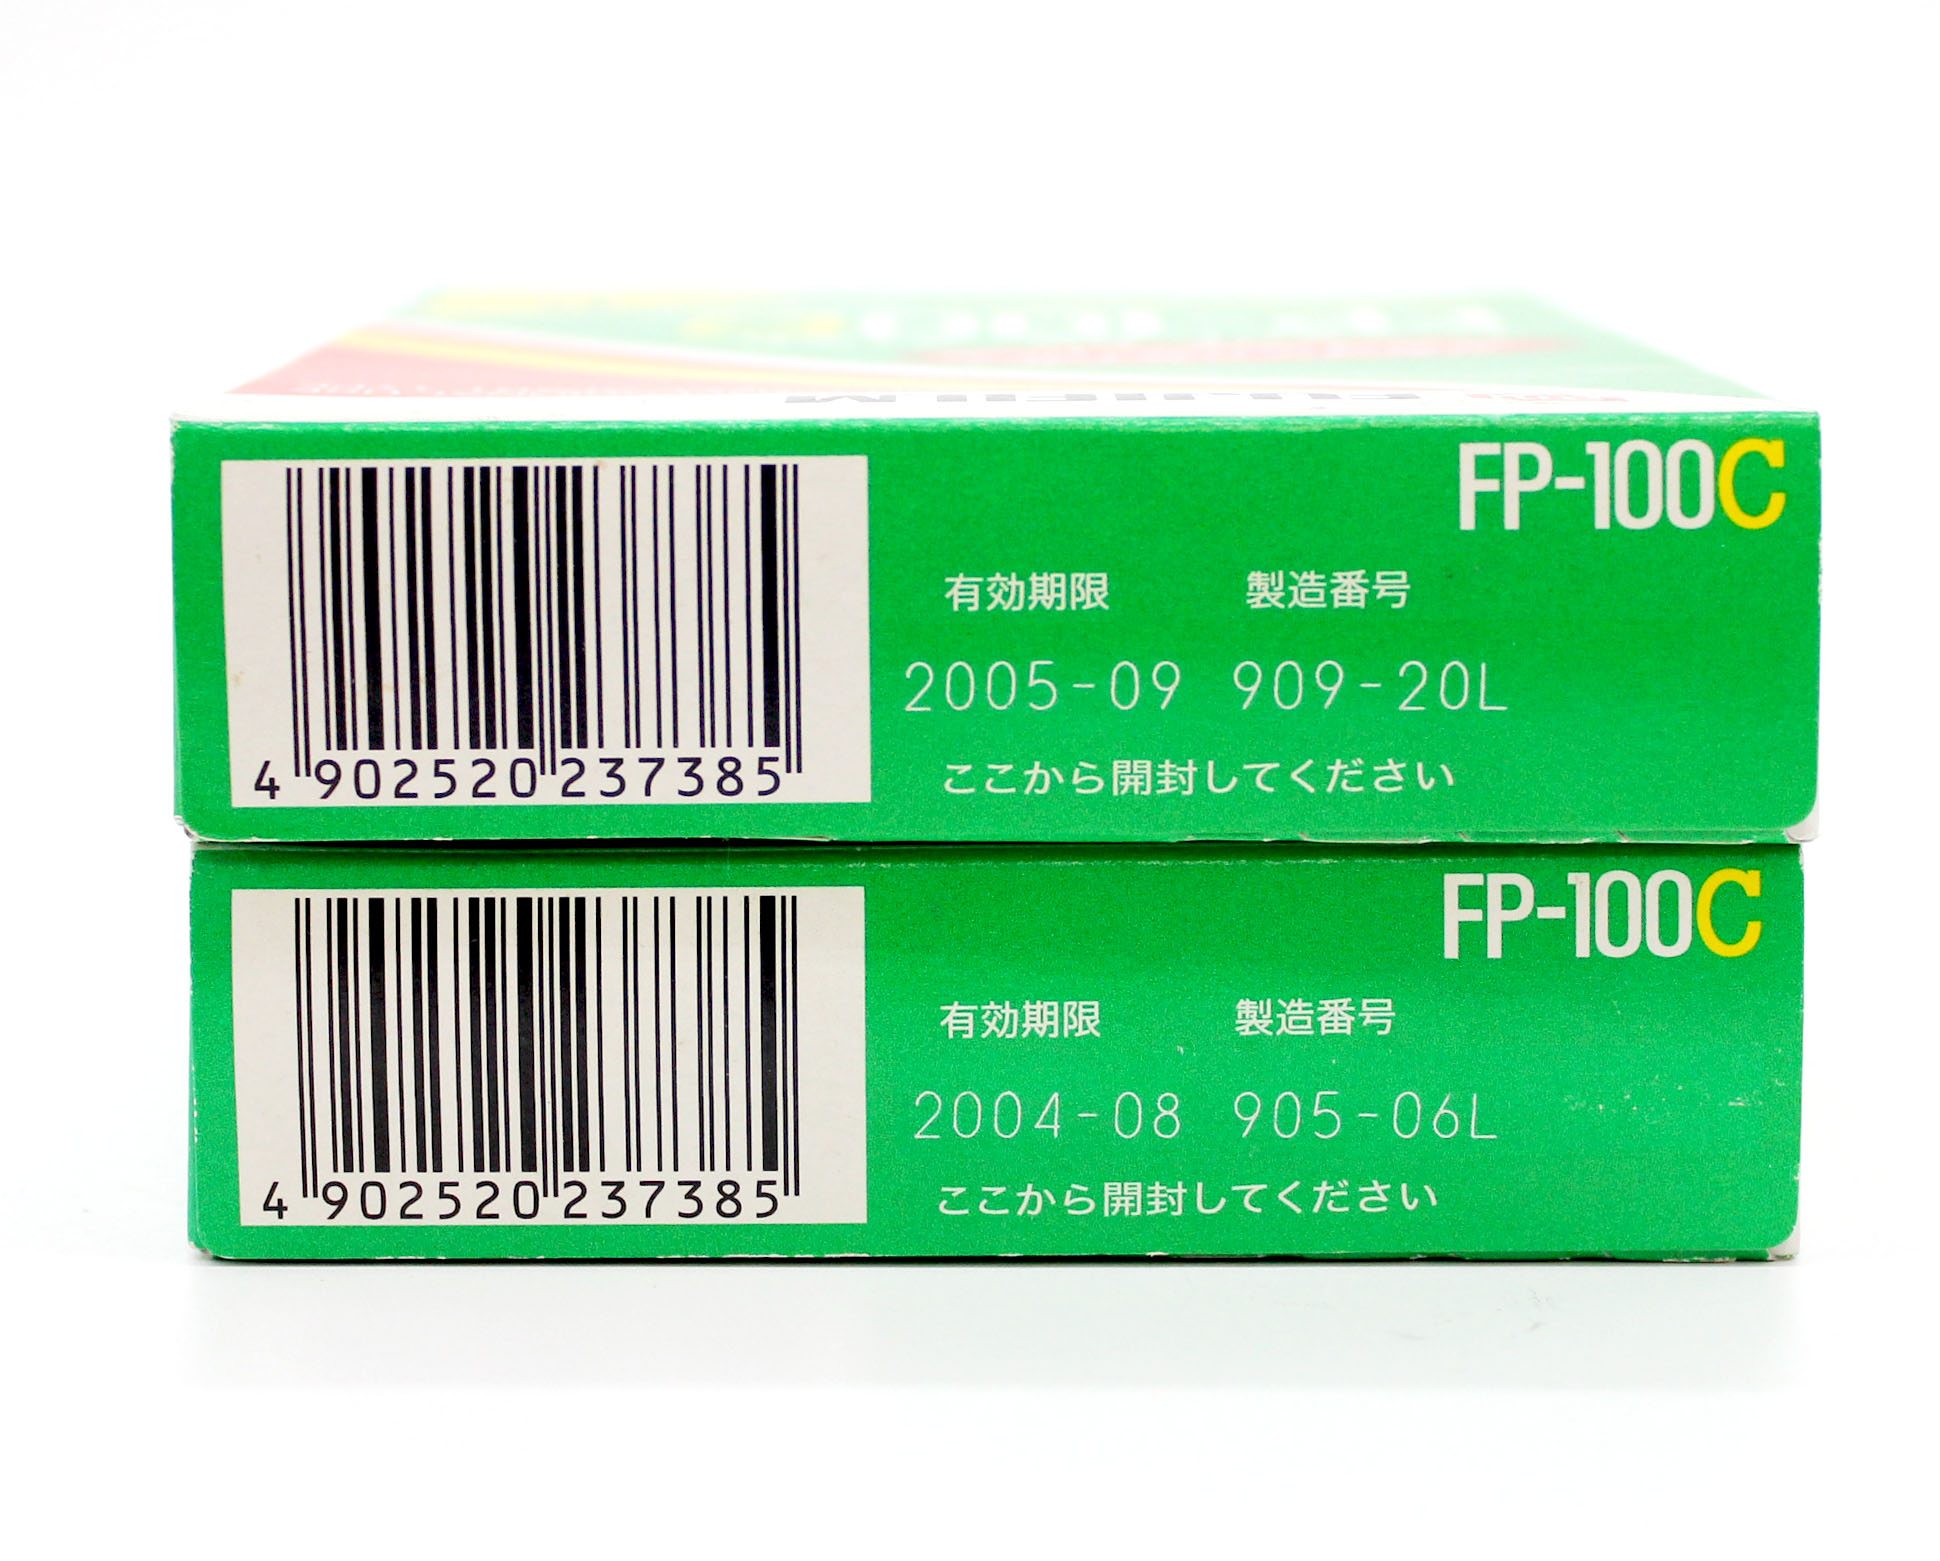  Fujifilm FP-100C Instant Color Film Set of 2 (Expired) from Japan Photo 3